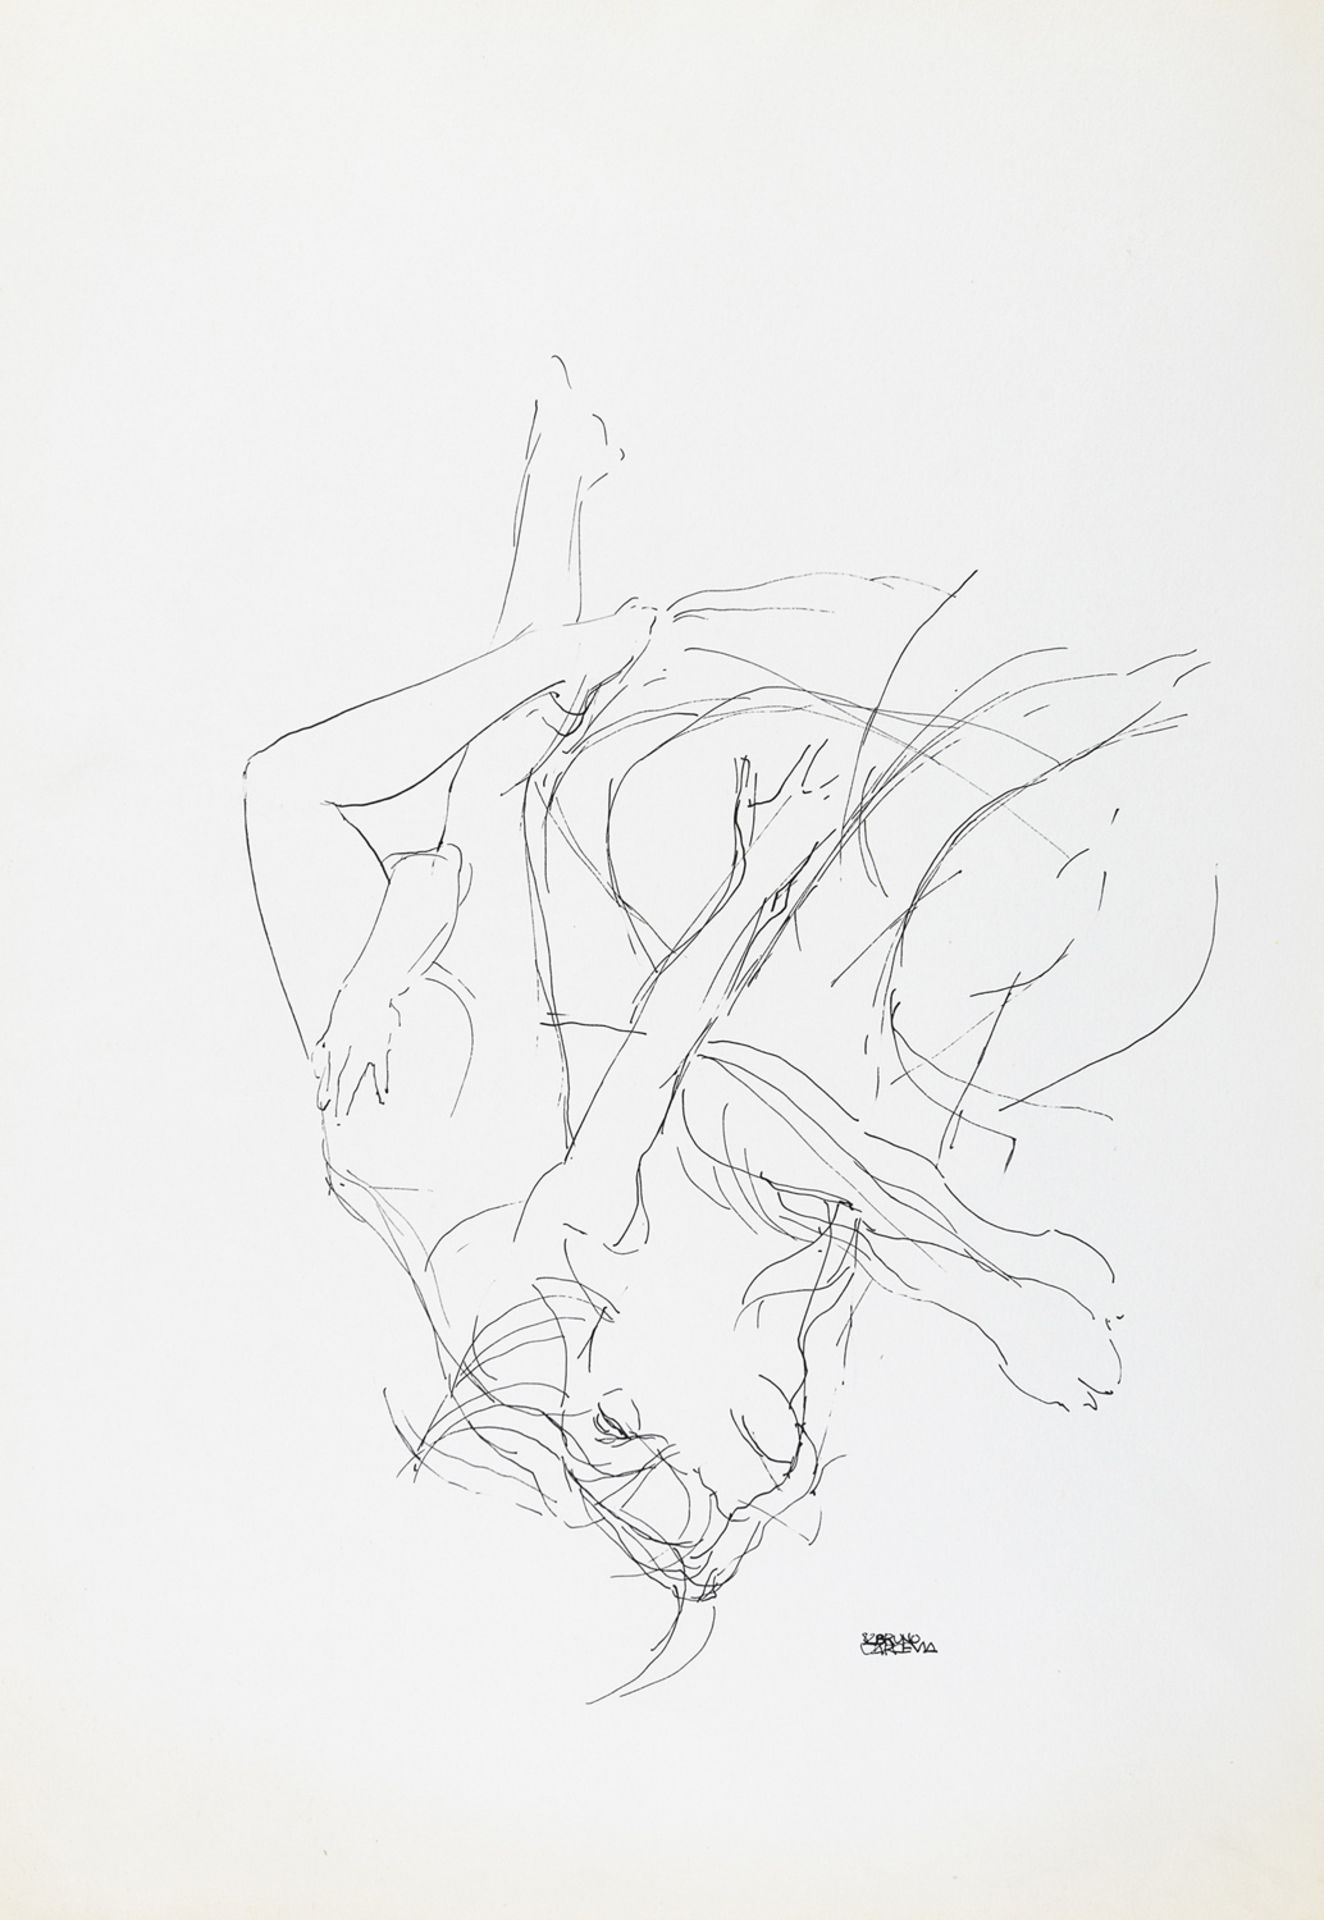 INK DRAWING BY BRUNO D'ARCEVIA 1982